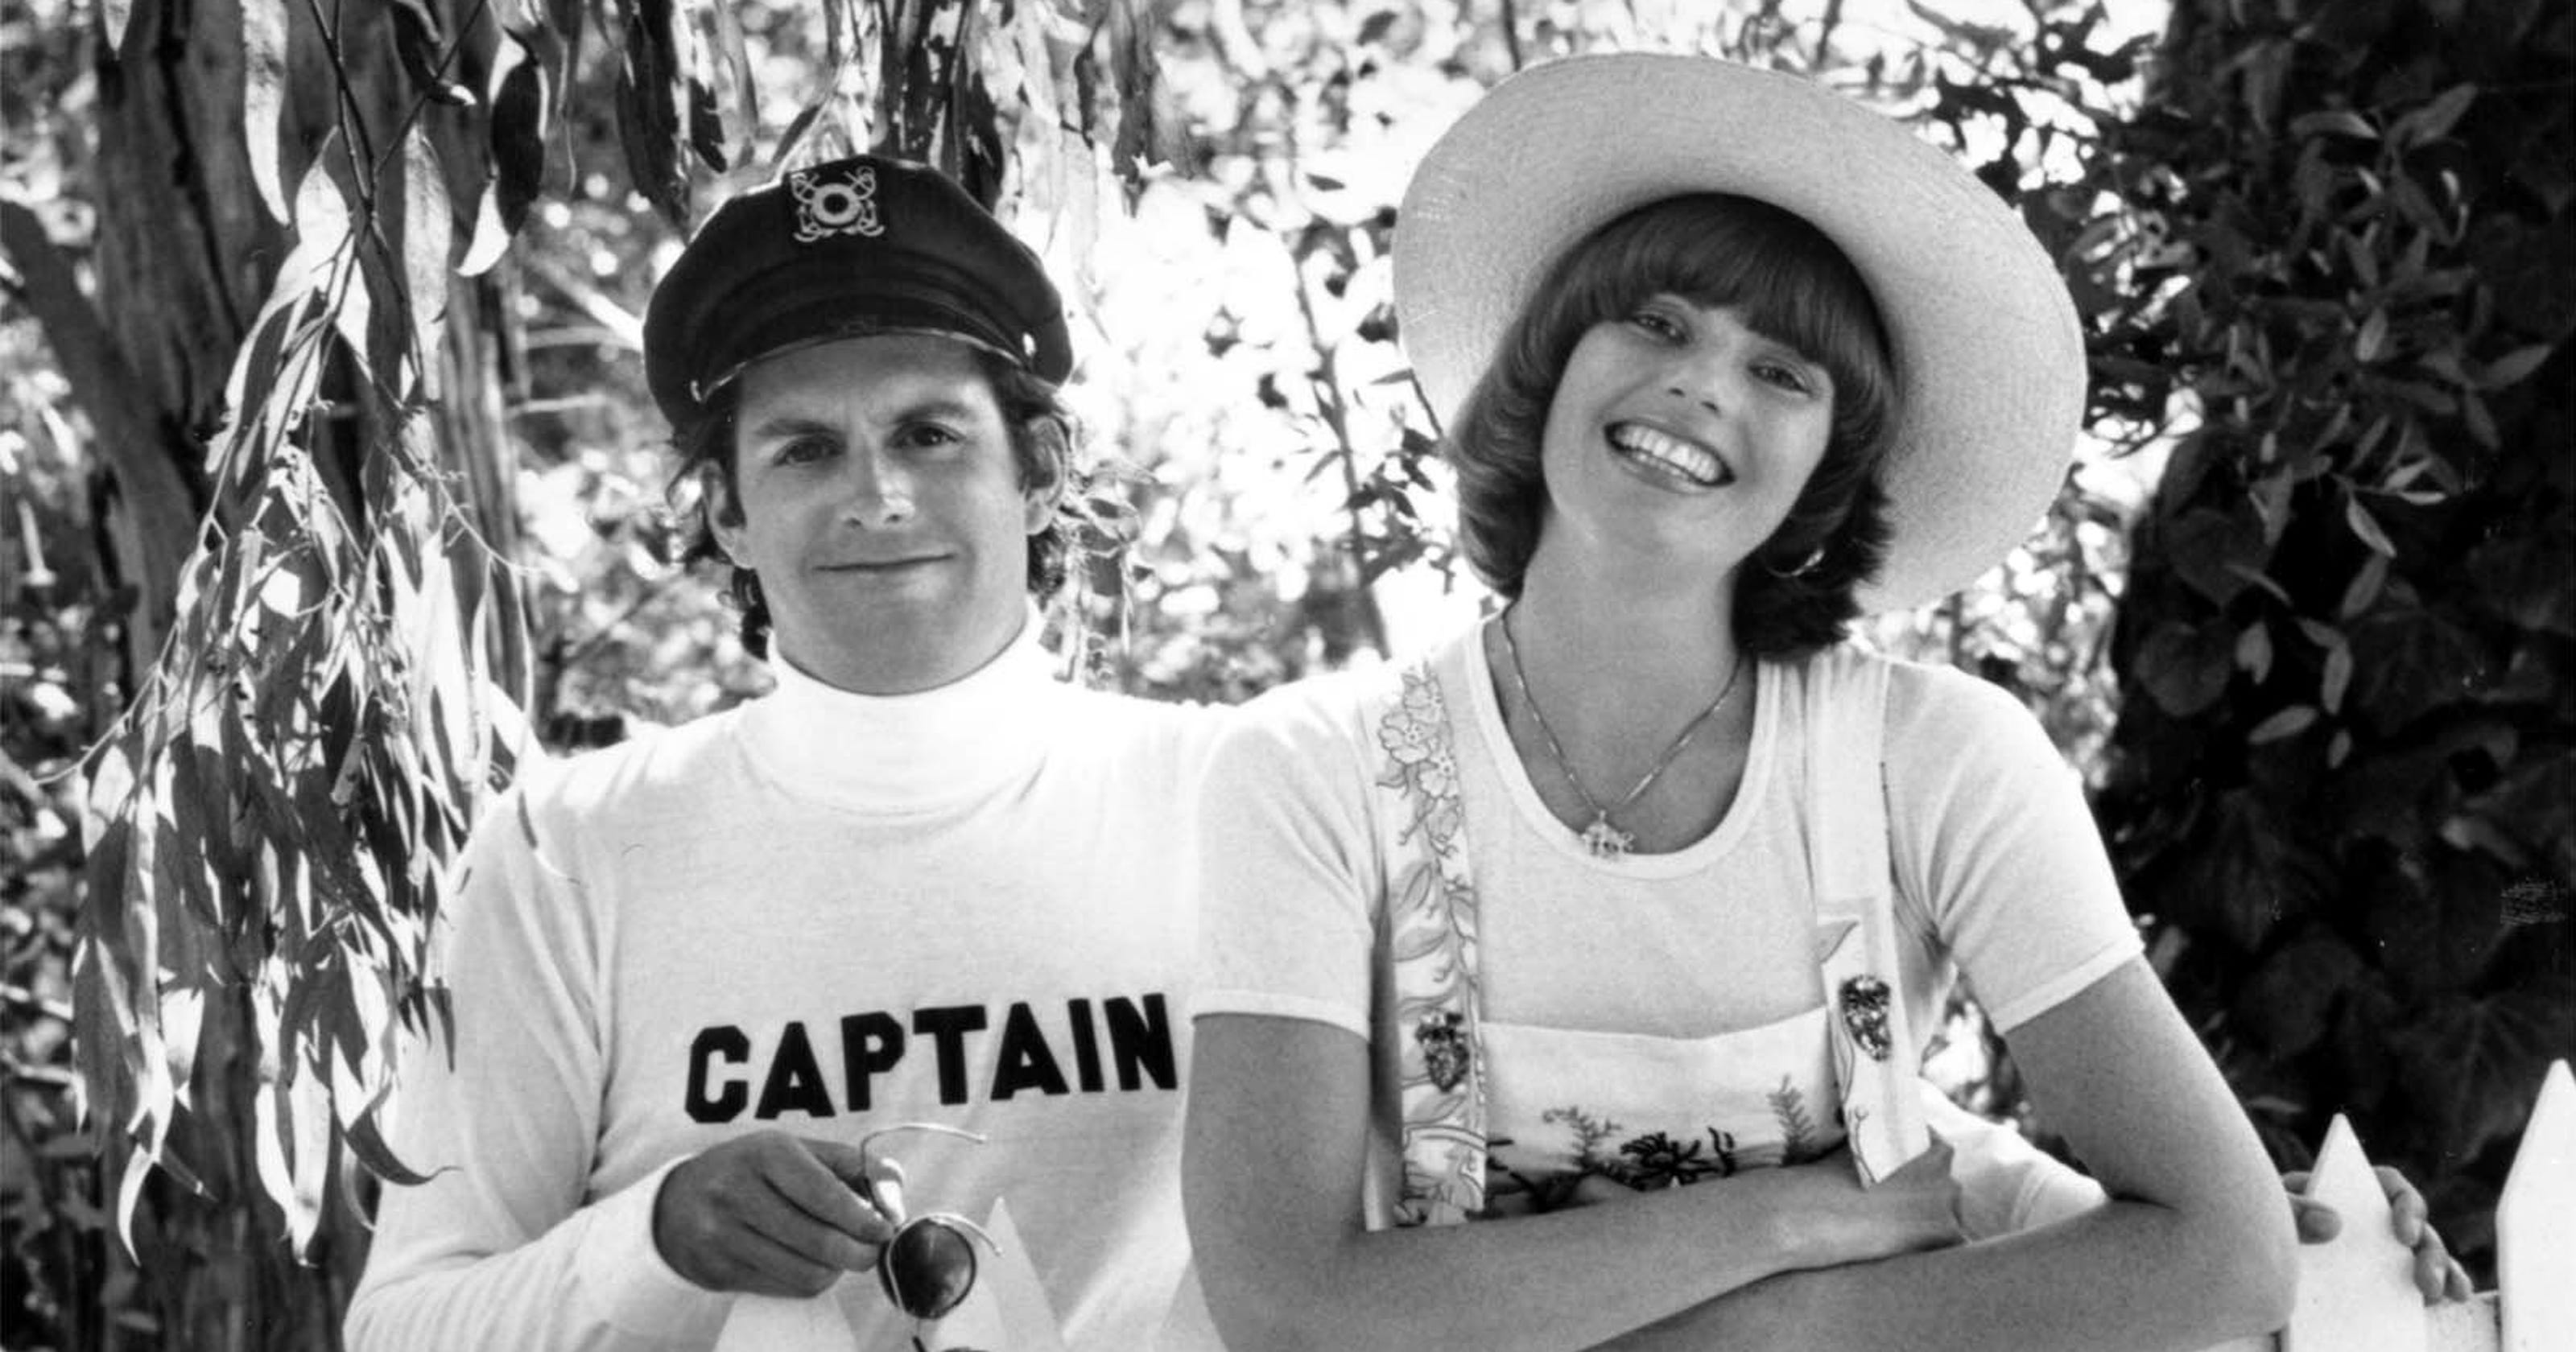 Daryl Dragon of Captain & Tennille has died in Prescott at 76